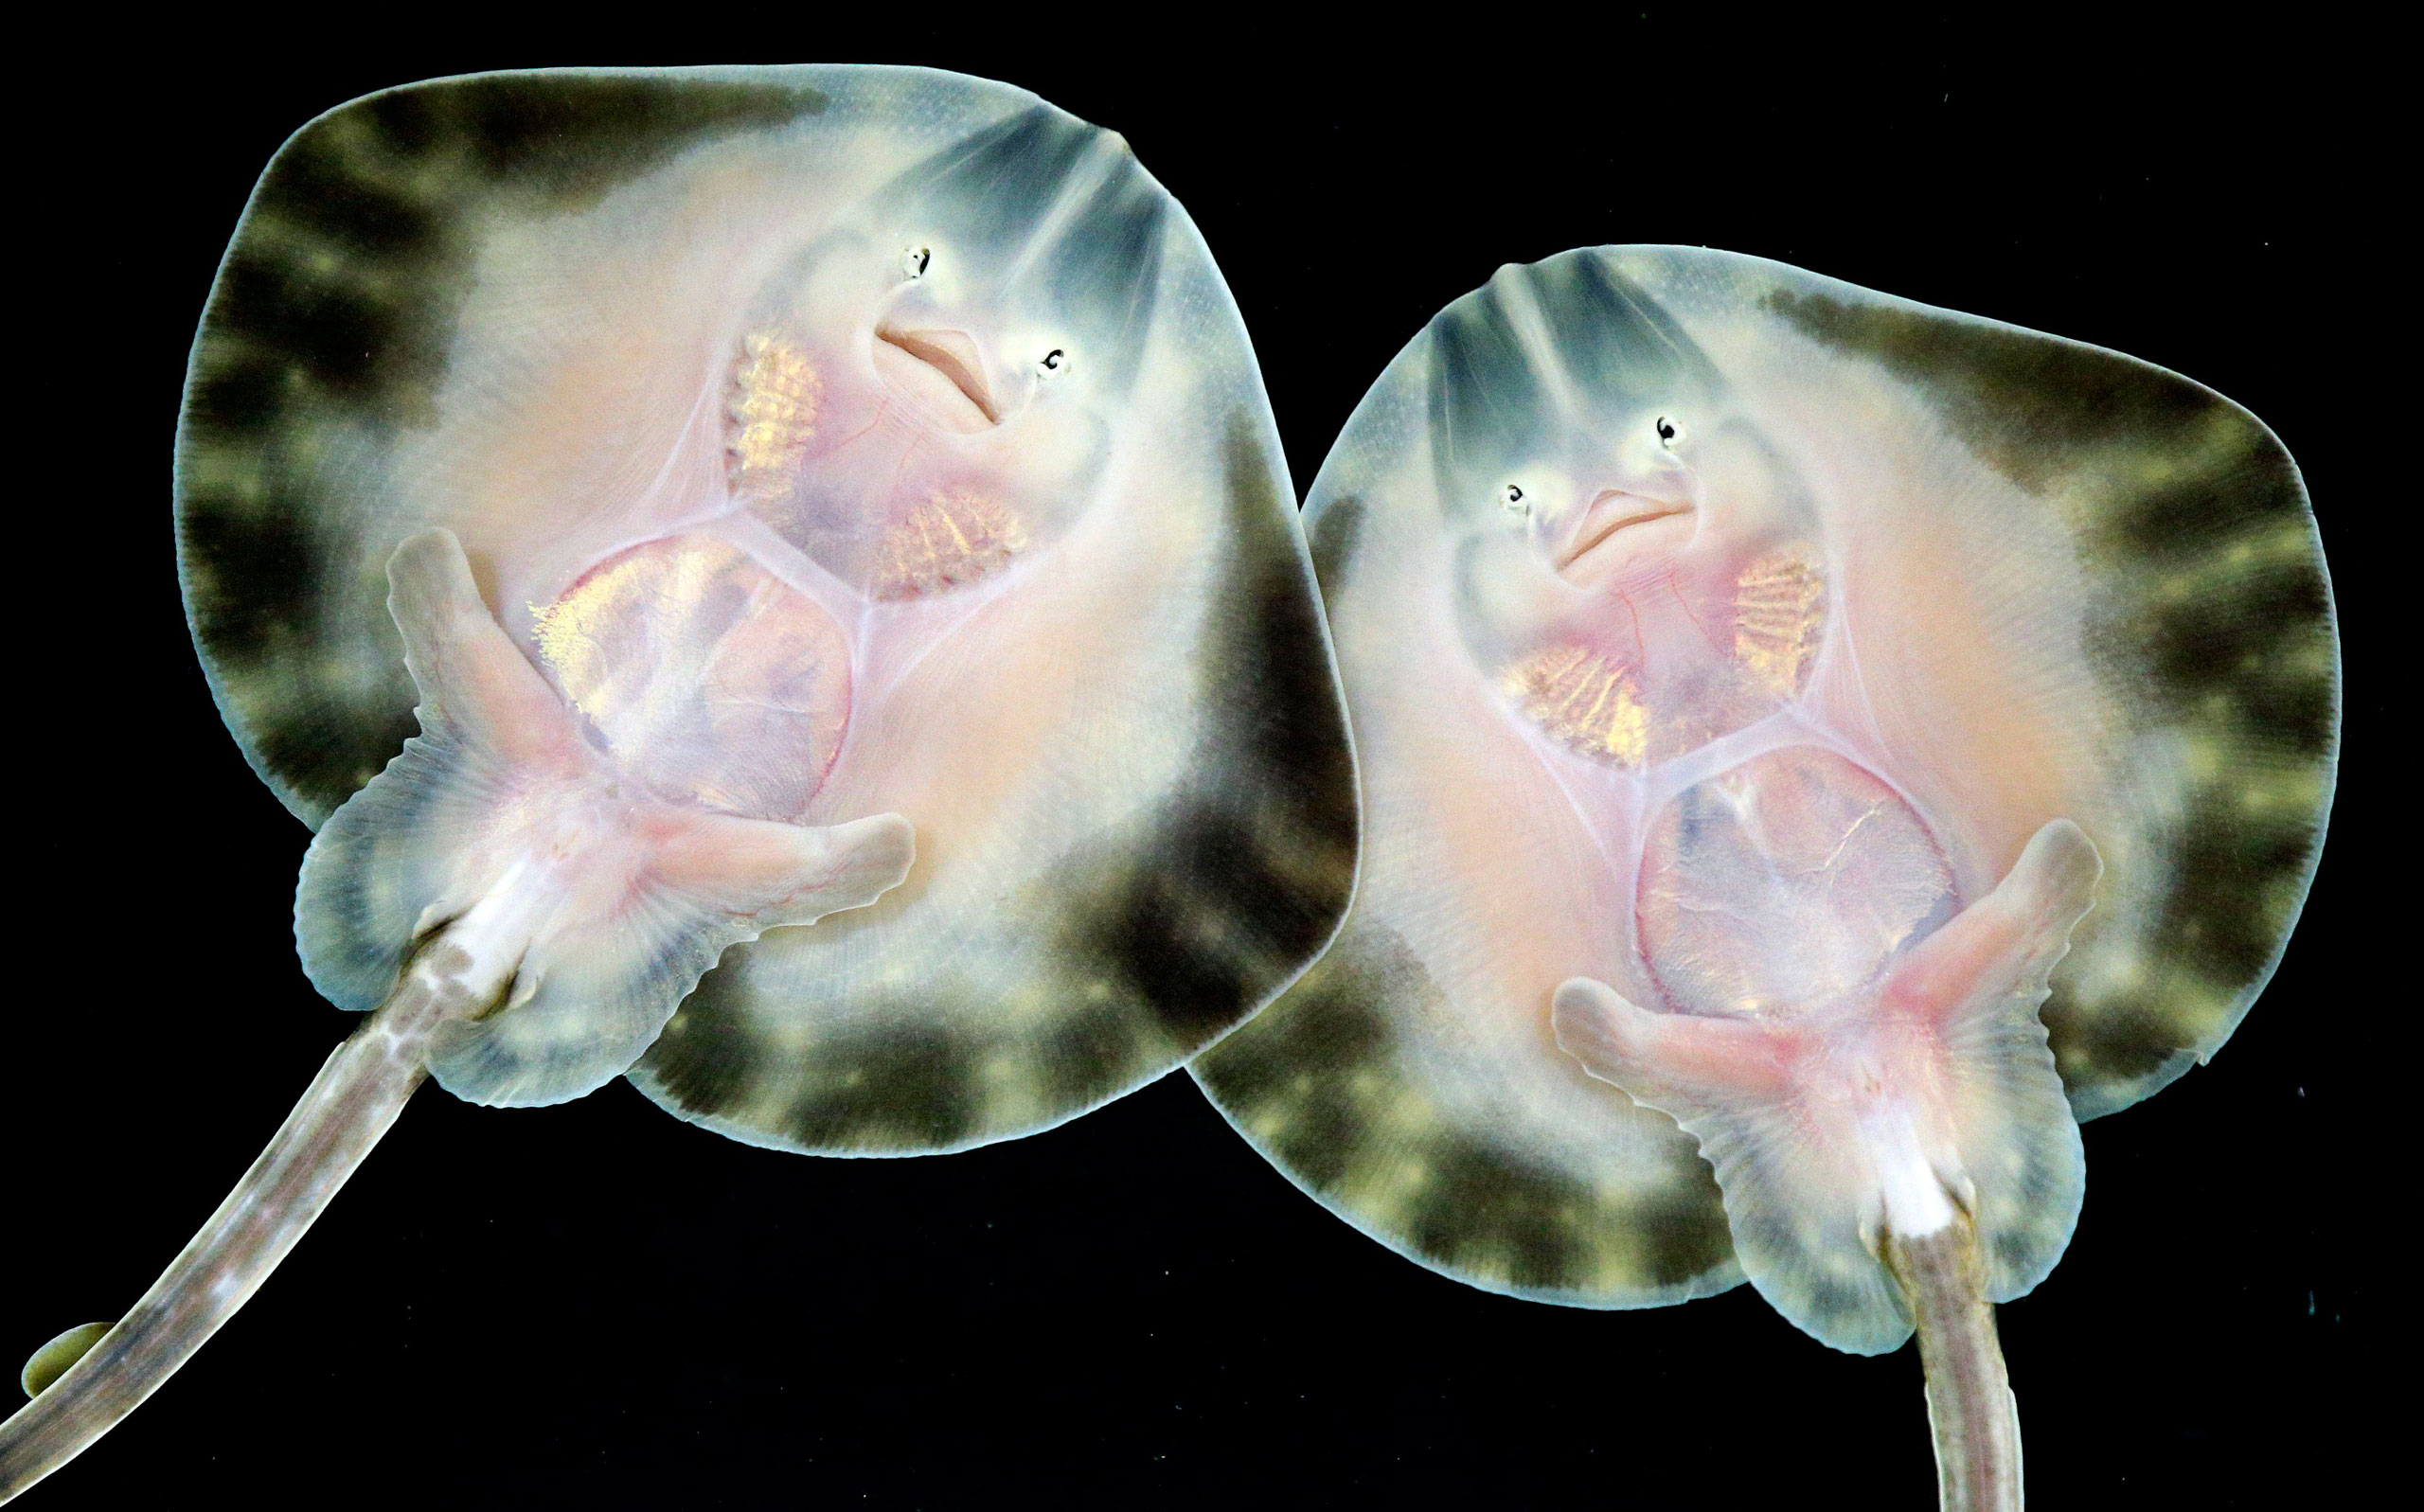 Two endangered baby undulate rays were born at the Sea Life London Aquarium as part of the attraction's breeding and tracking programme. Aug. 11, 2015.